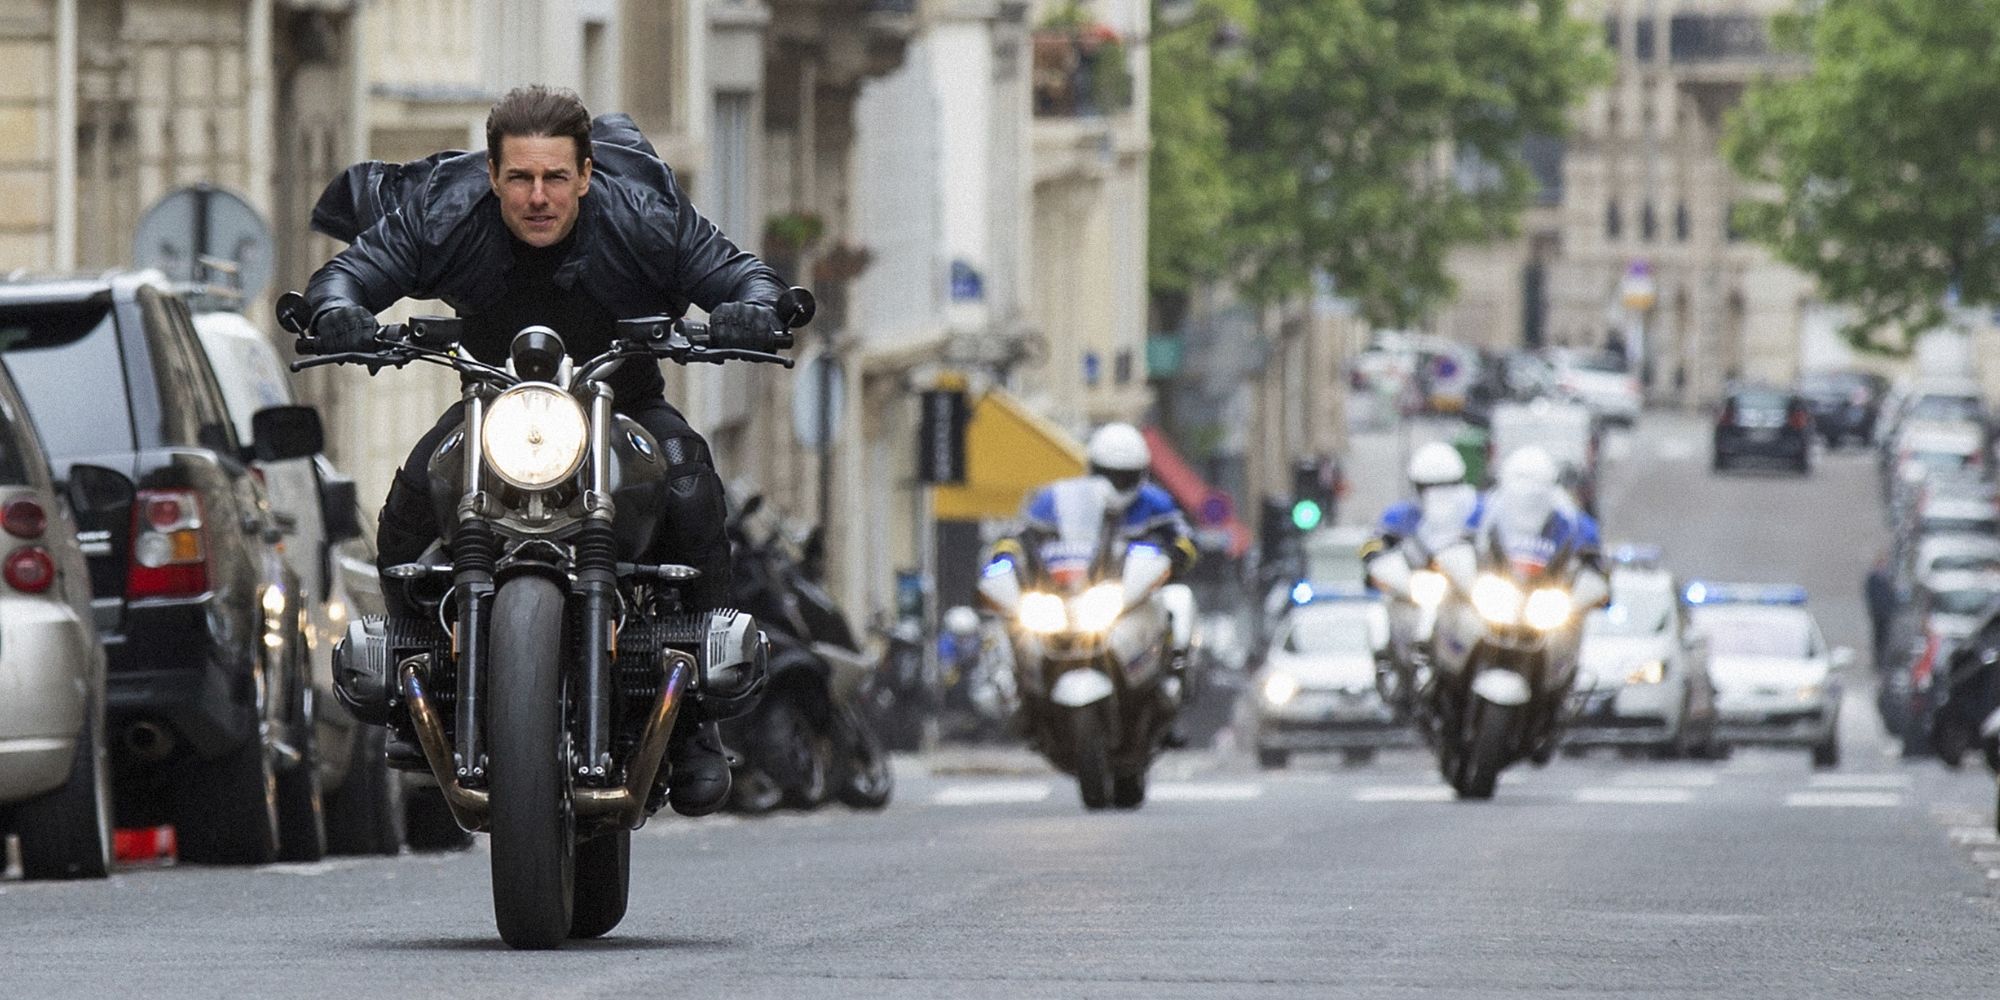 Ethan Hunt (Tom Cruise) riding a motorbike in 'Mission: Impossible - Fallout' (2014)